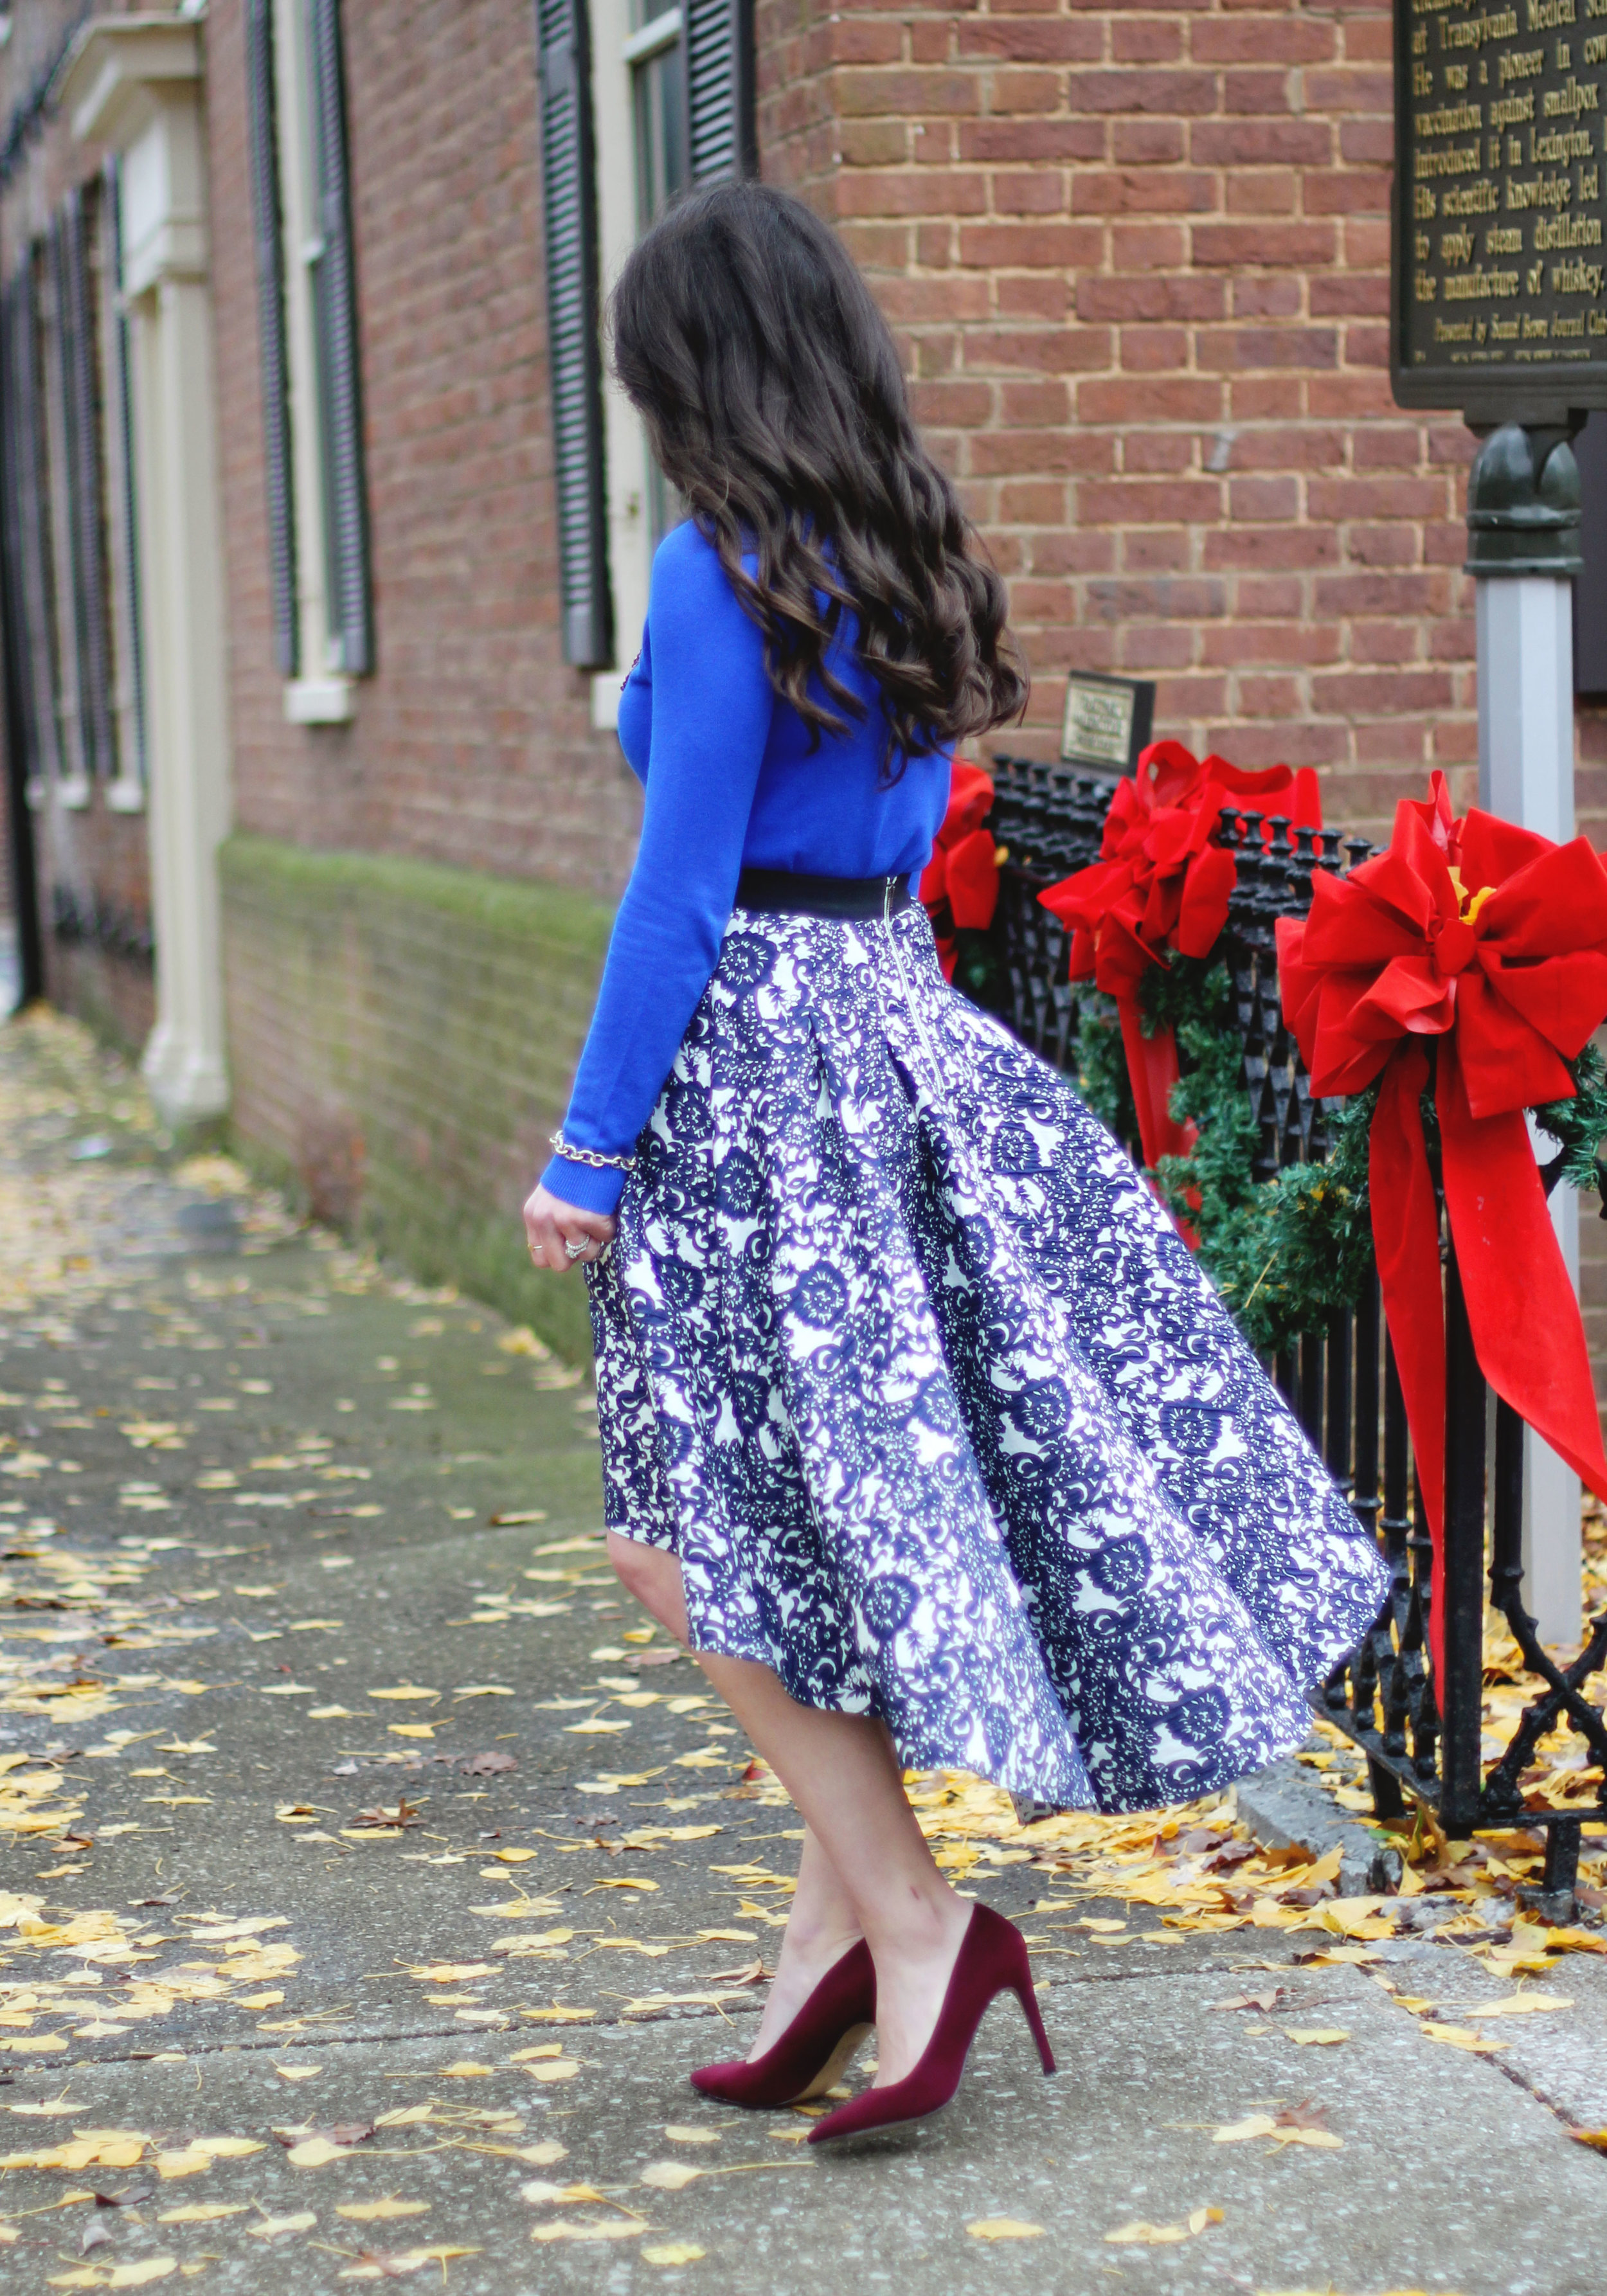 Holiday Outfit, Christmas Party Outfit, Anthropologie Vespertine High Low Skirt, Target Cobalt Blue Sweater, Wine Pumps, Rebecca Minkoff Envelope Clutch, Baublebar Courtney Bib Neclace